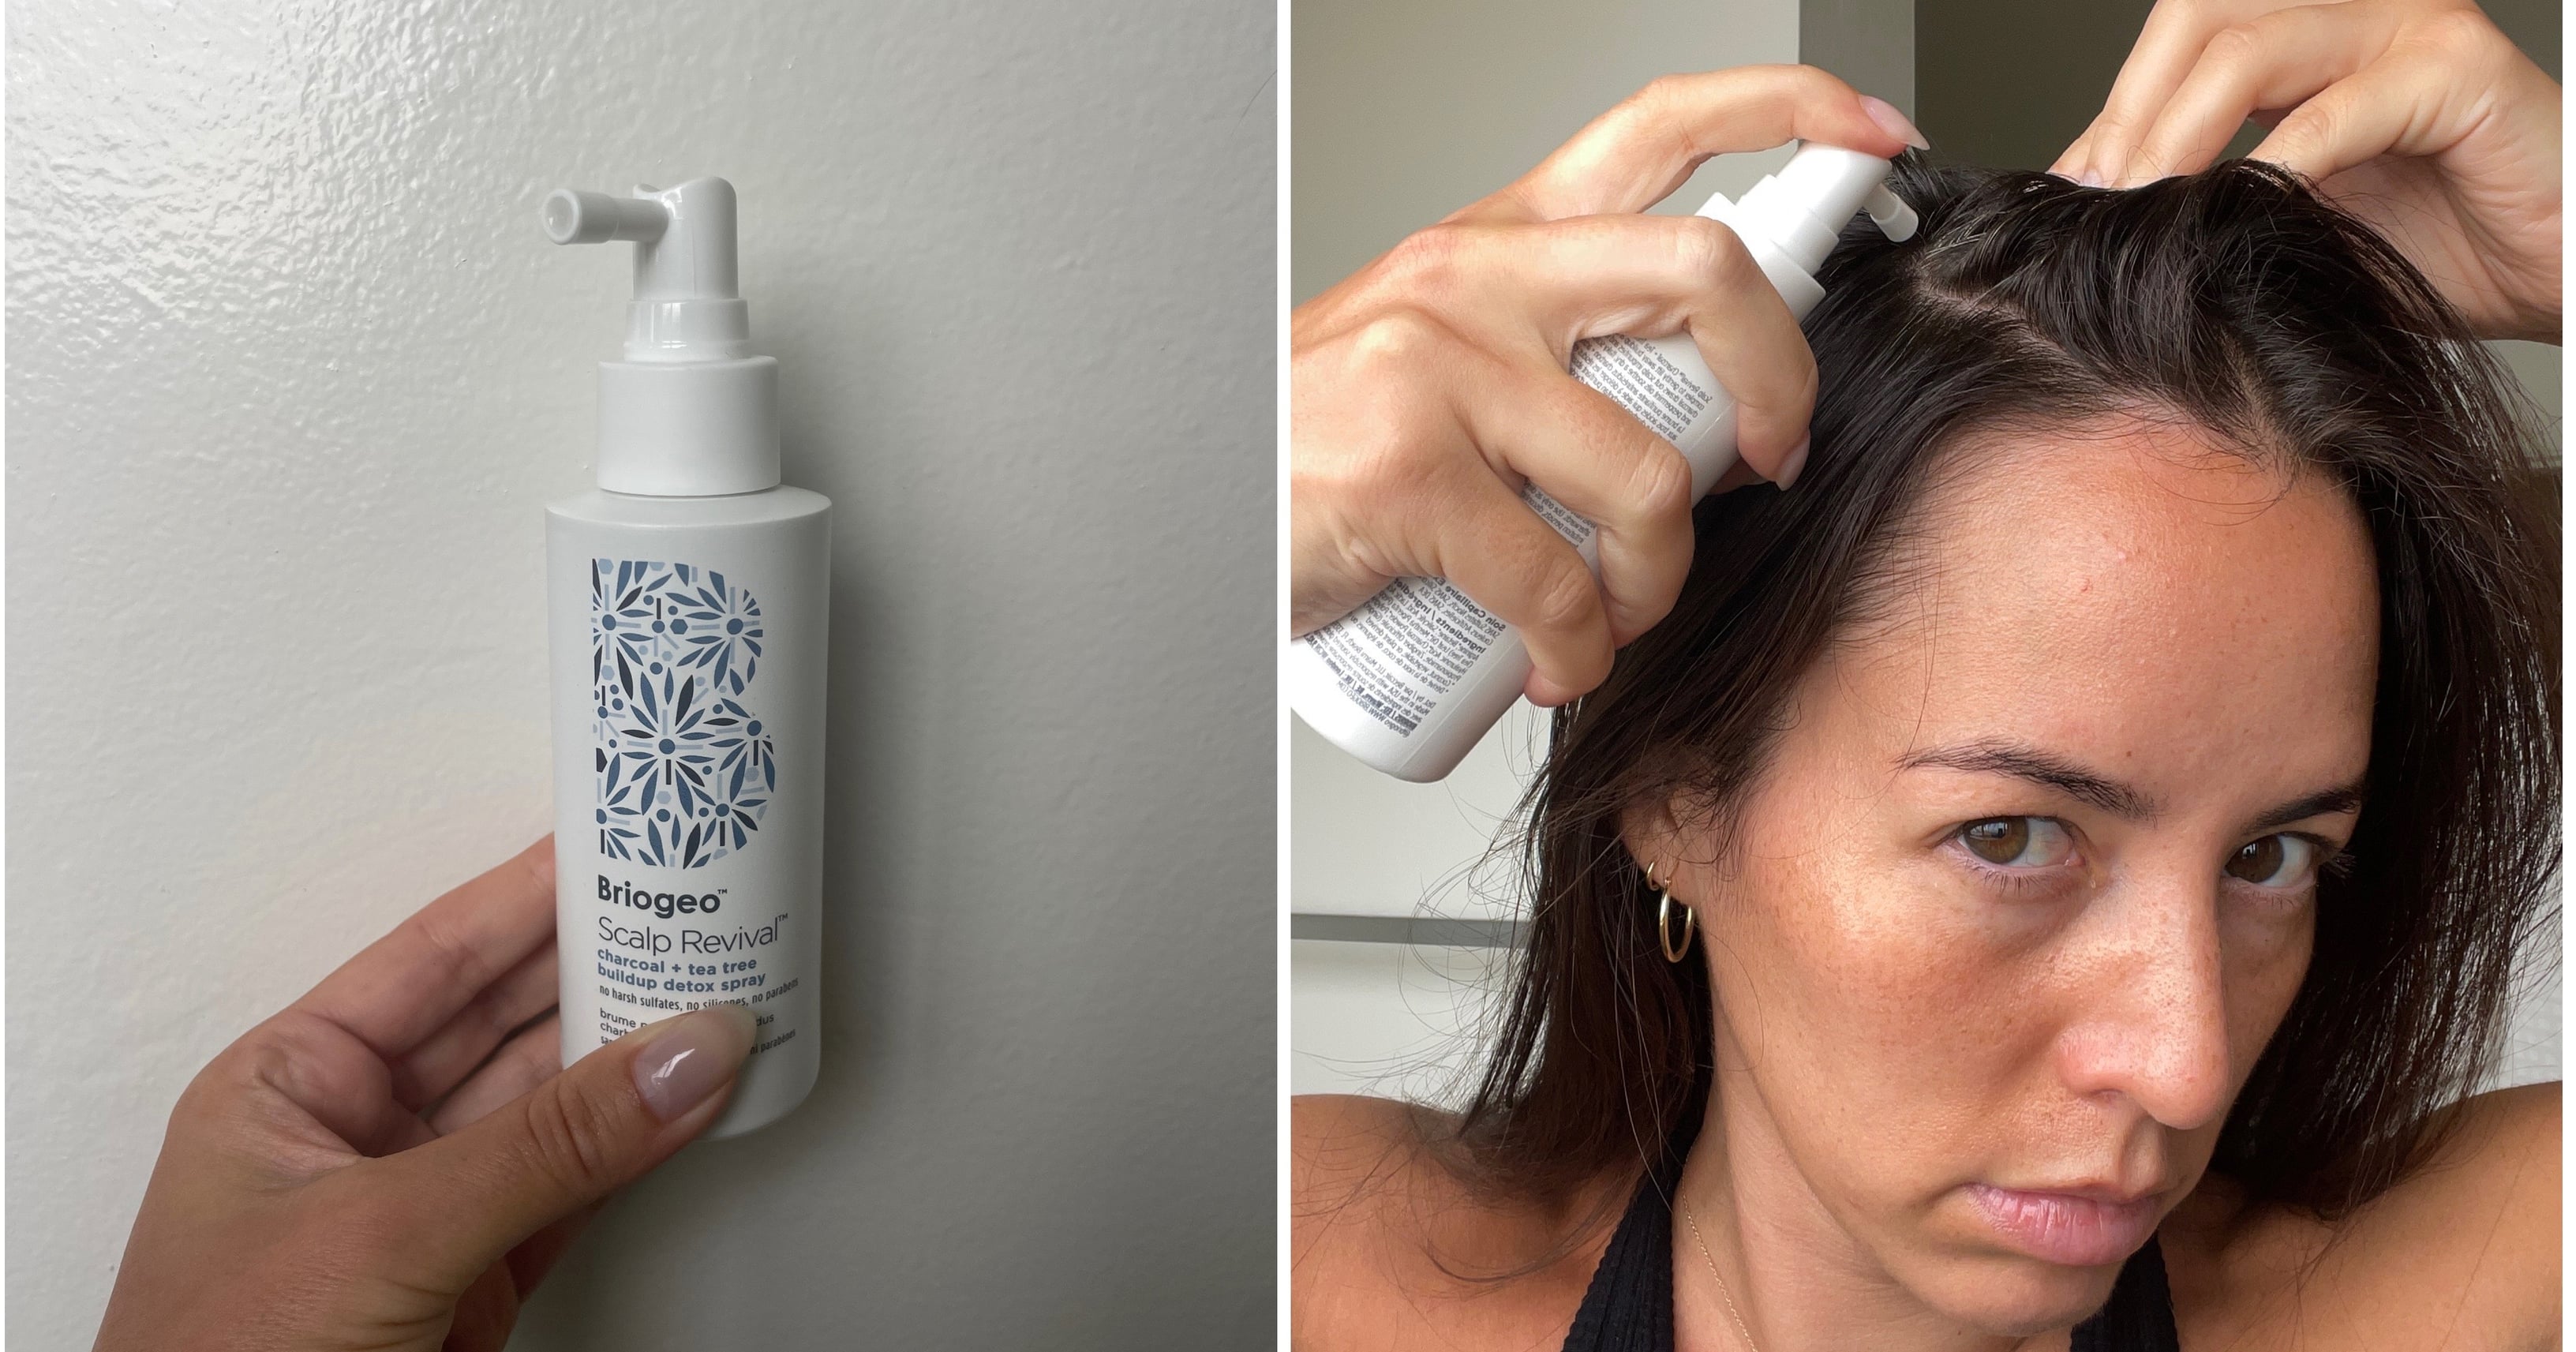 I Tried a Scalp Detox Spray, and My Hair Has Never Looked Better